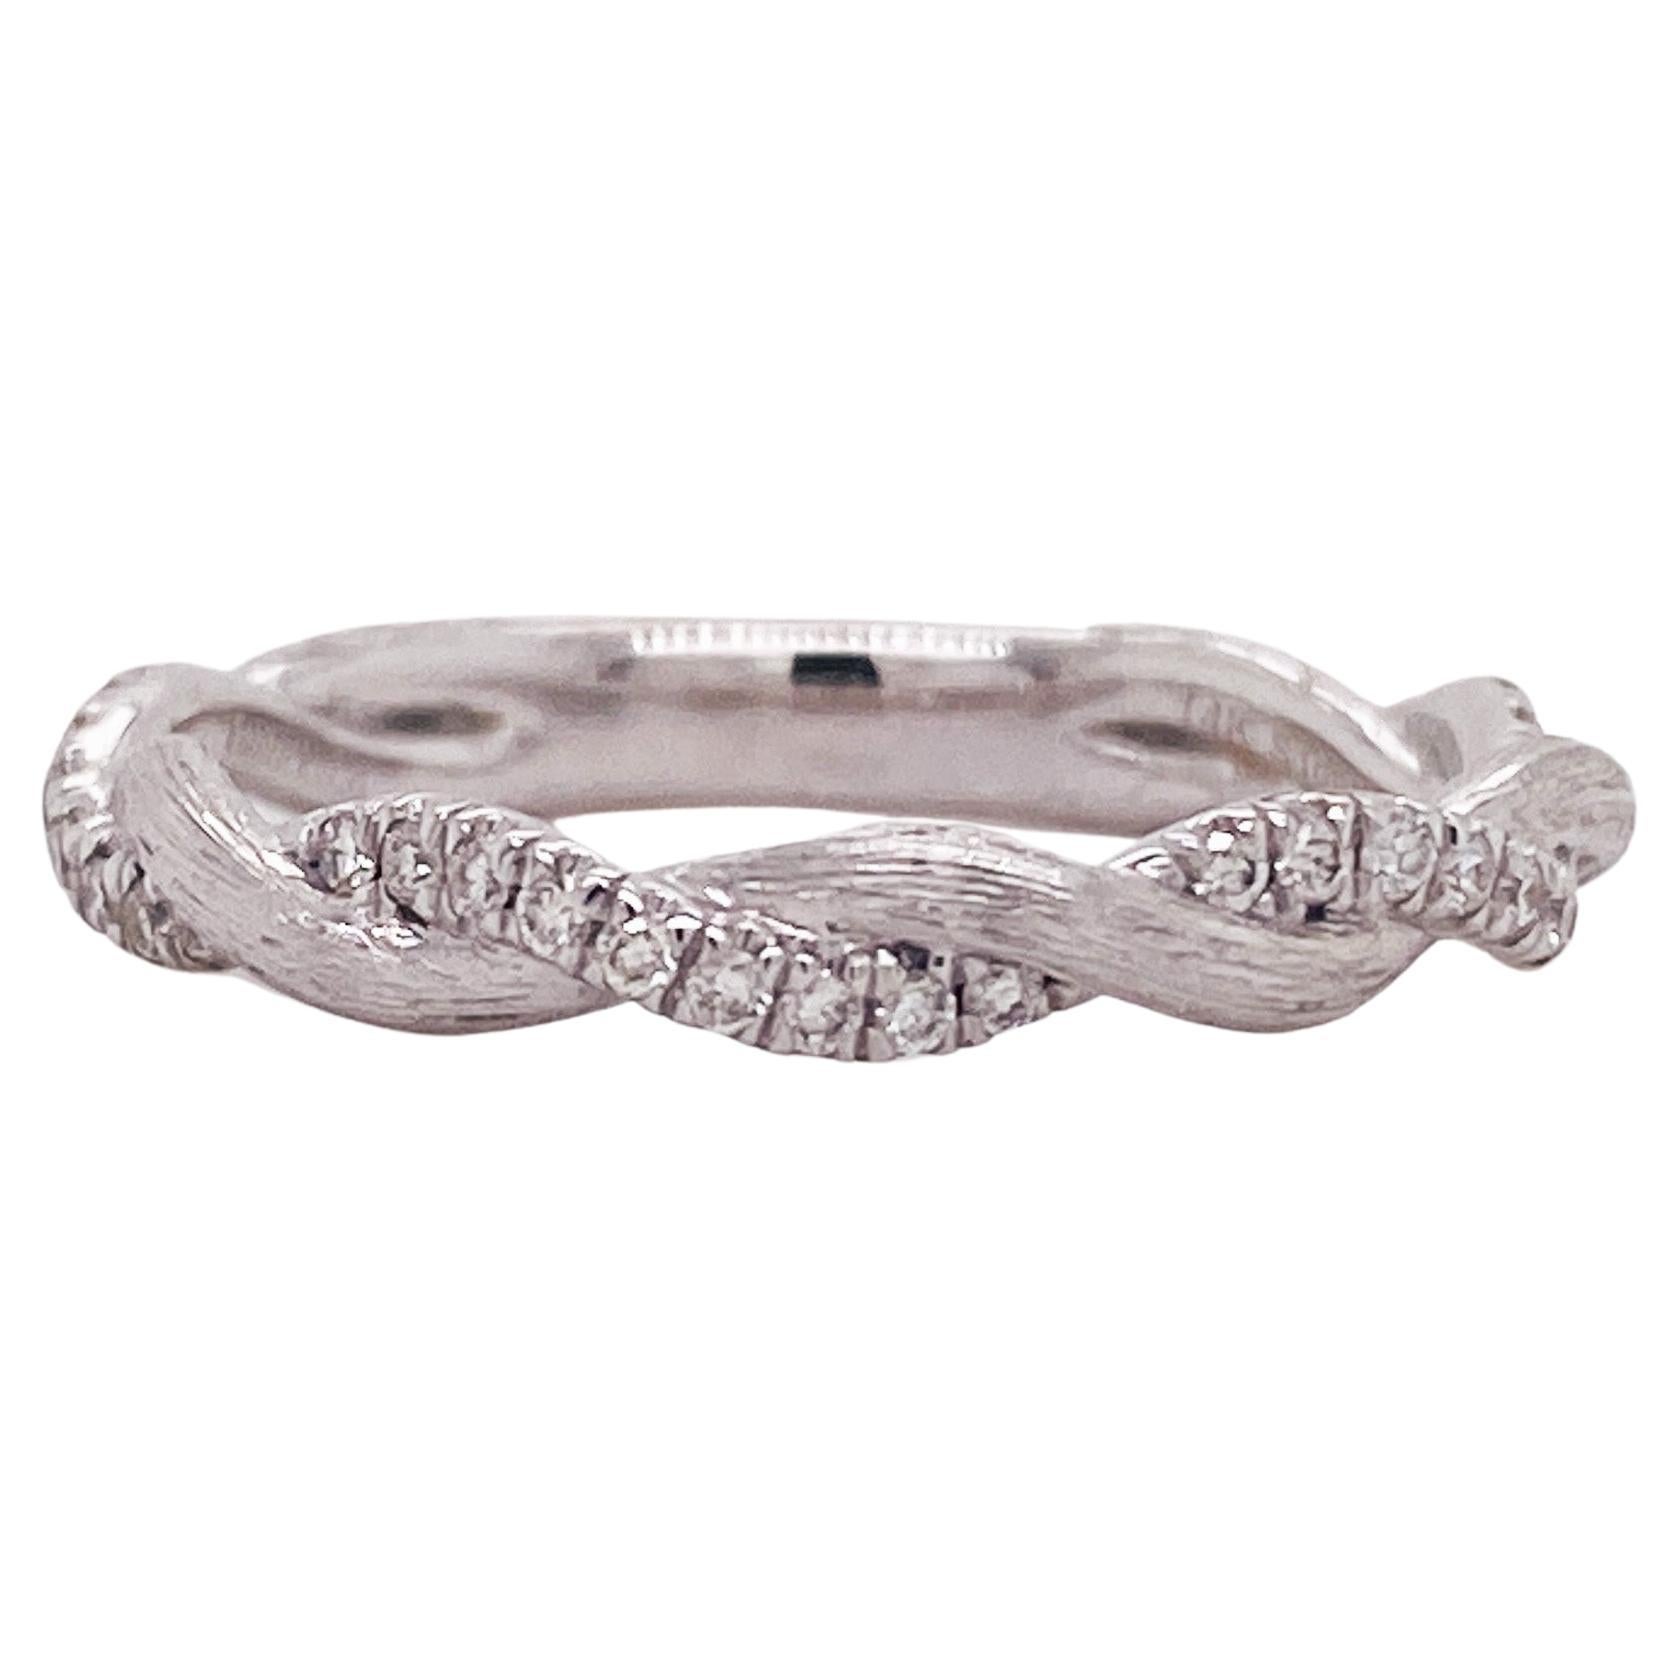 For Sale:  Diamond Twist Satin Finish Band in 14k White Gold .20 Carat Stackable Ring